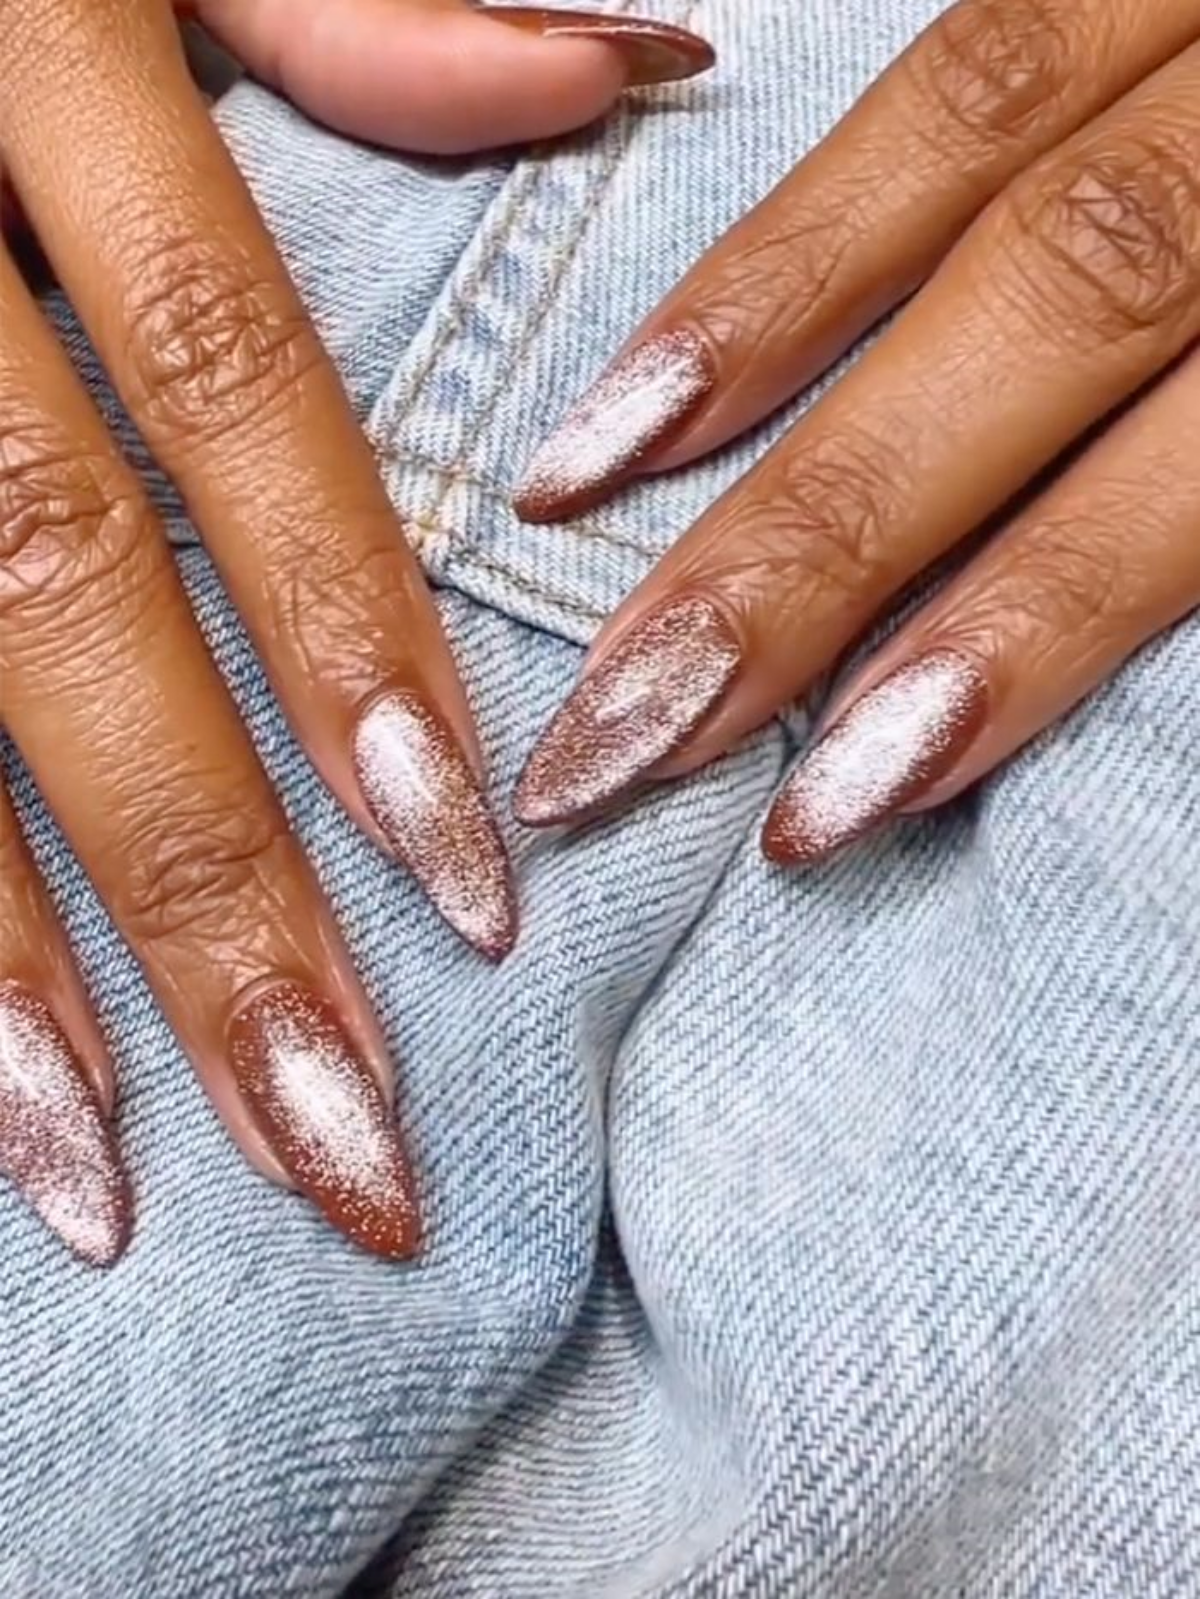 1677513645 261 Manicure trends 2023 and which fingernail fashion conjures up the.webp - Manicure trends 2023 and which fingernail fashion conjures up the look?